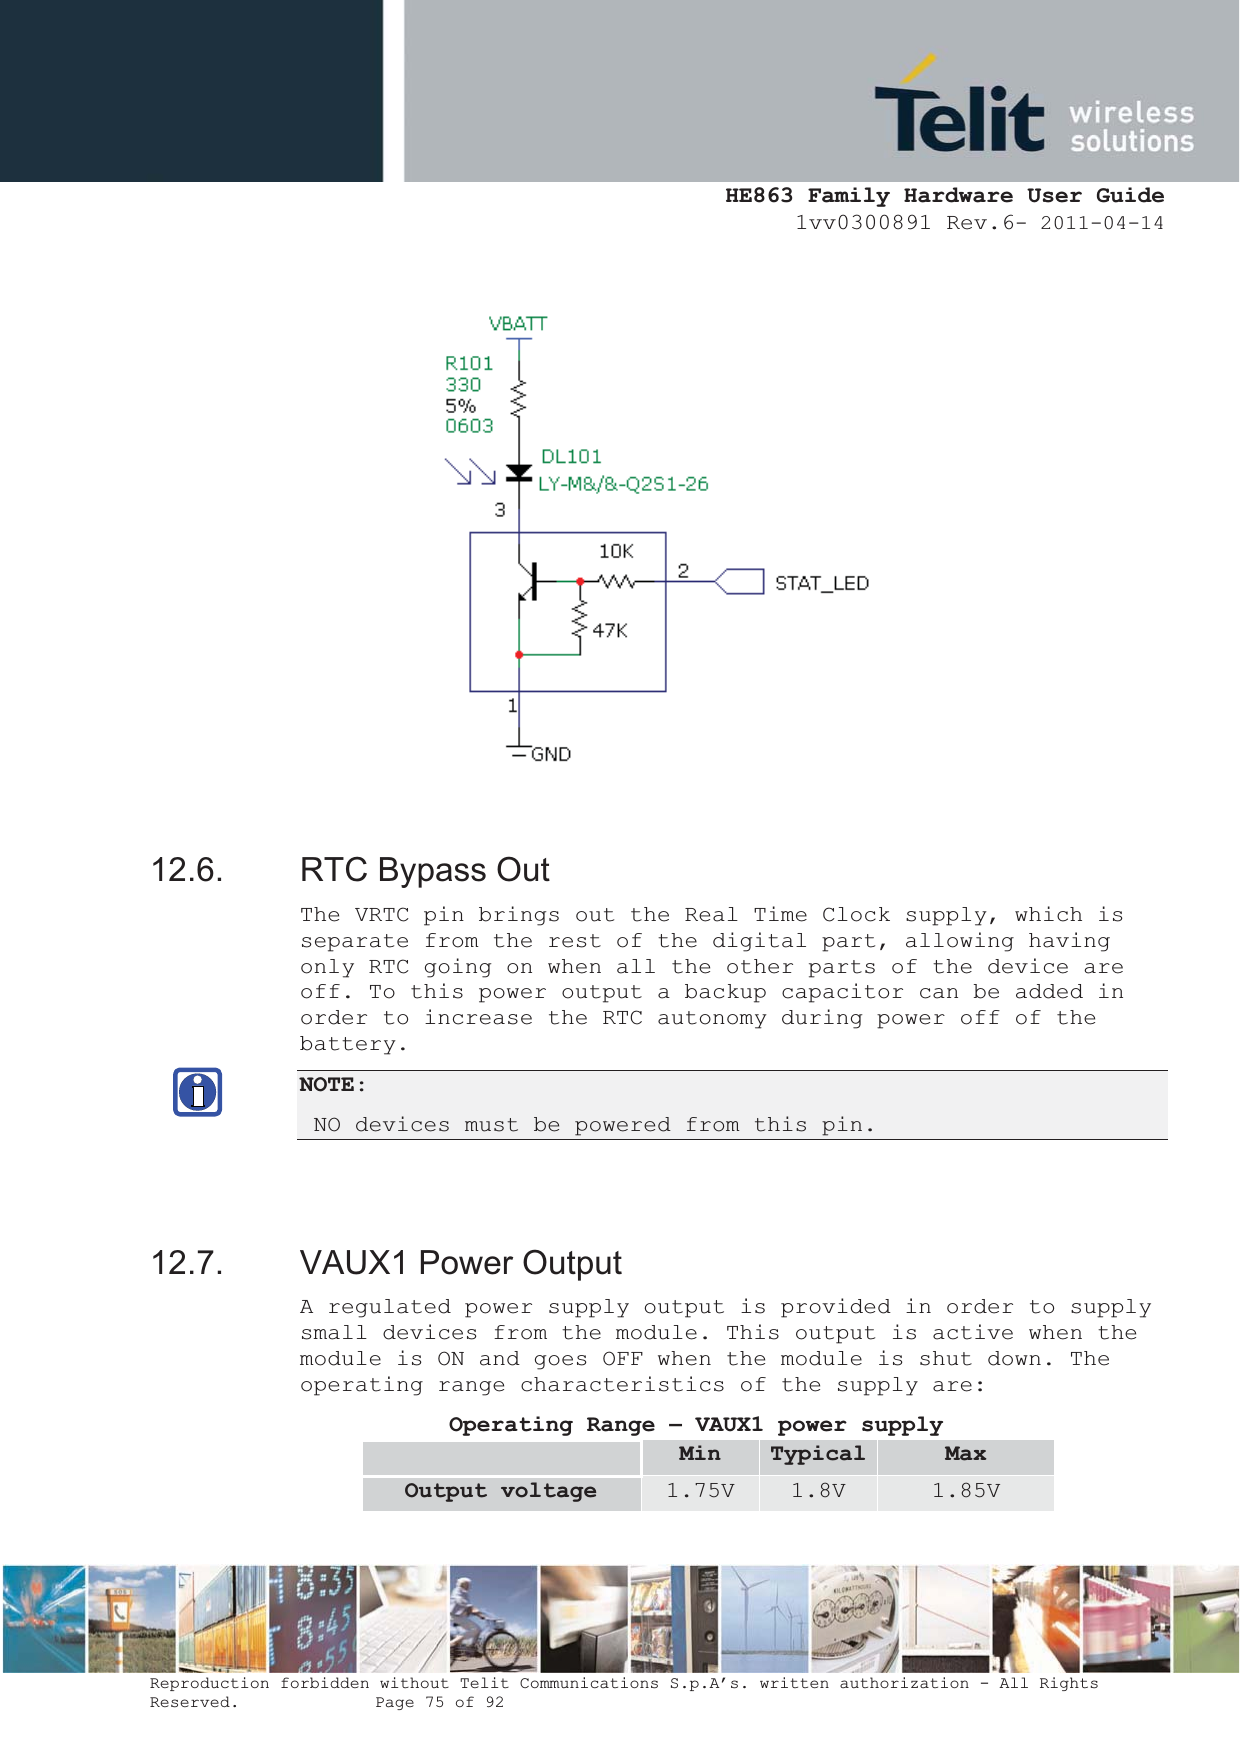  HE863 Family Hardware User Guide 1vv0300891 Rev.6- 2011-04-14    Reproduction forbidden without Telit Communications S.p.A’s. written authorization - All Rights Reserved.    Page 75 of 92                 12.6.  RTC Bypass Out The VRTC pin brings out the Real Time Clock supply, which is separate from the rest of the digital part, allowing having only RTC going on when all the other parts of the device are off. To this power output a backup capacitor can be added in order to increase the RTC autonomy during power off of the battery.  NOTE:  NO devices must be powered from this pin.   12.7.  VAUX1 Power Output A regulated power supply output is provided in order to supply small devices from the module. This output is active when the module is ON and goes OFF when the module is shut down. The operating range characteristics of the supply are: Operating Range – VAUX1 power supply Min Typical MaxOutput voltage  1.75V  1.8V  1.85V 